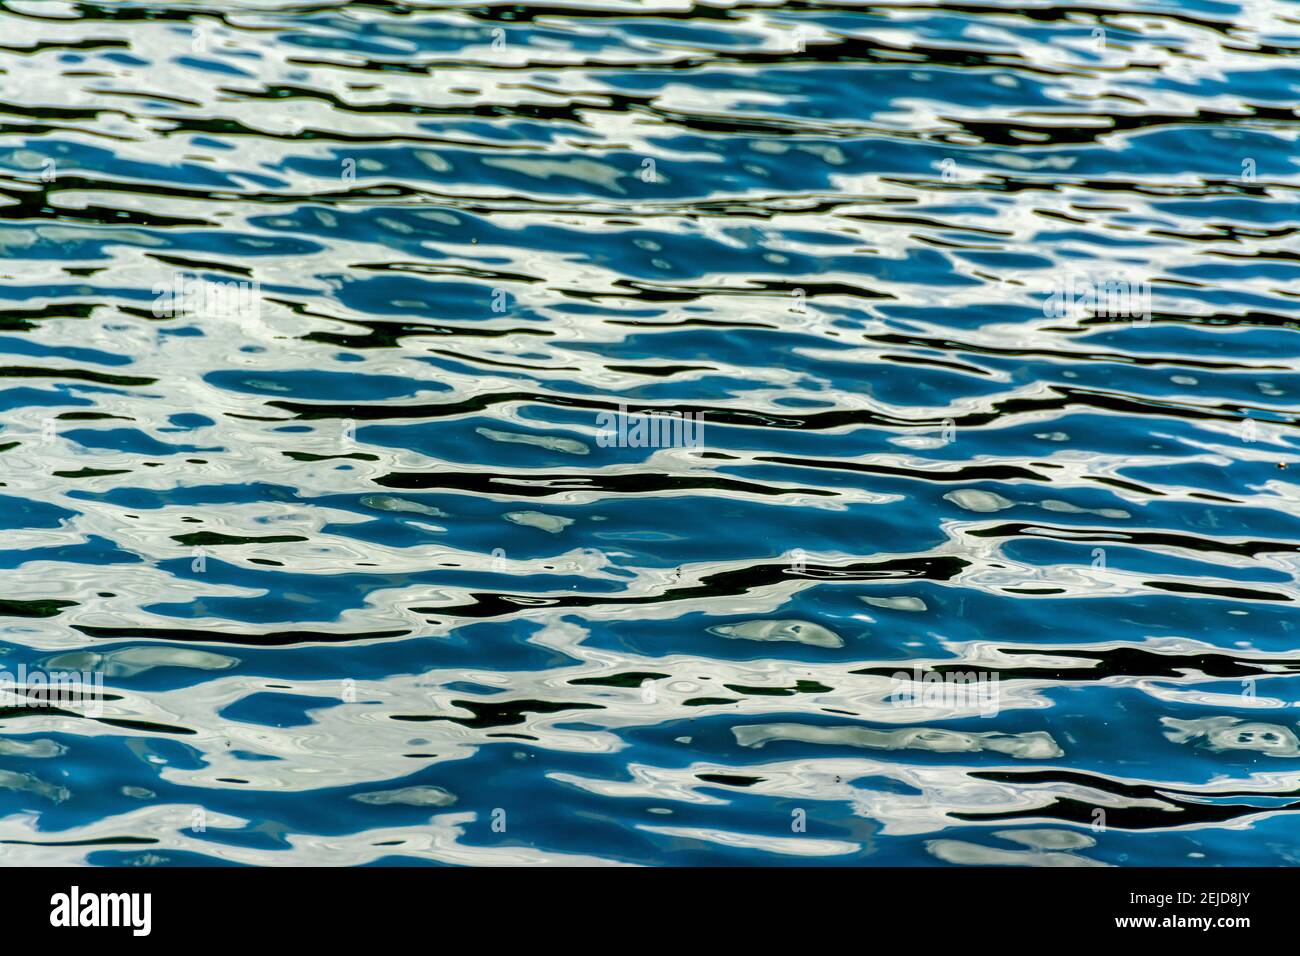 Patterns reflected on a water surface Stock Photo